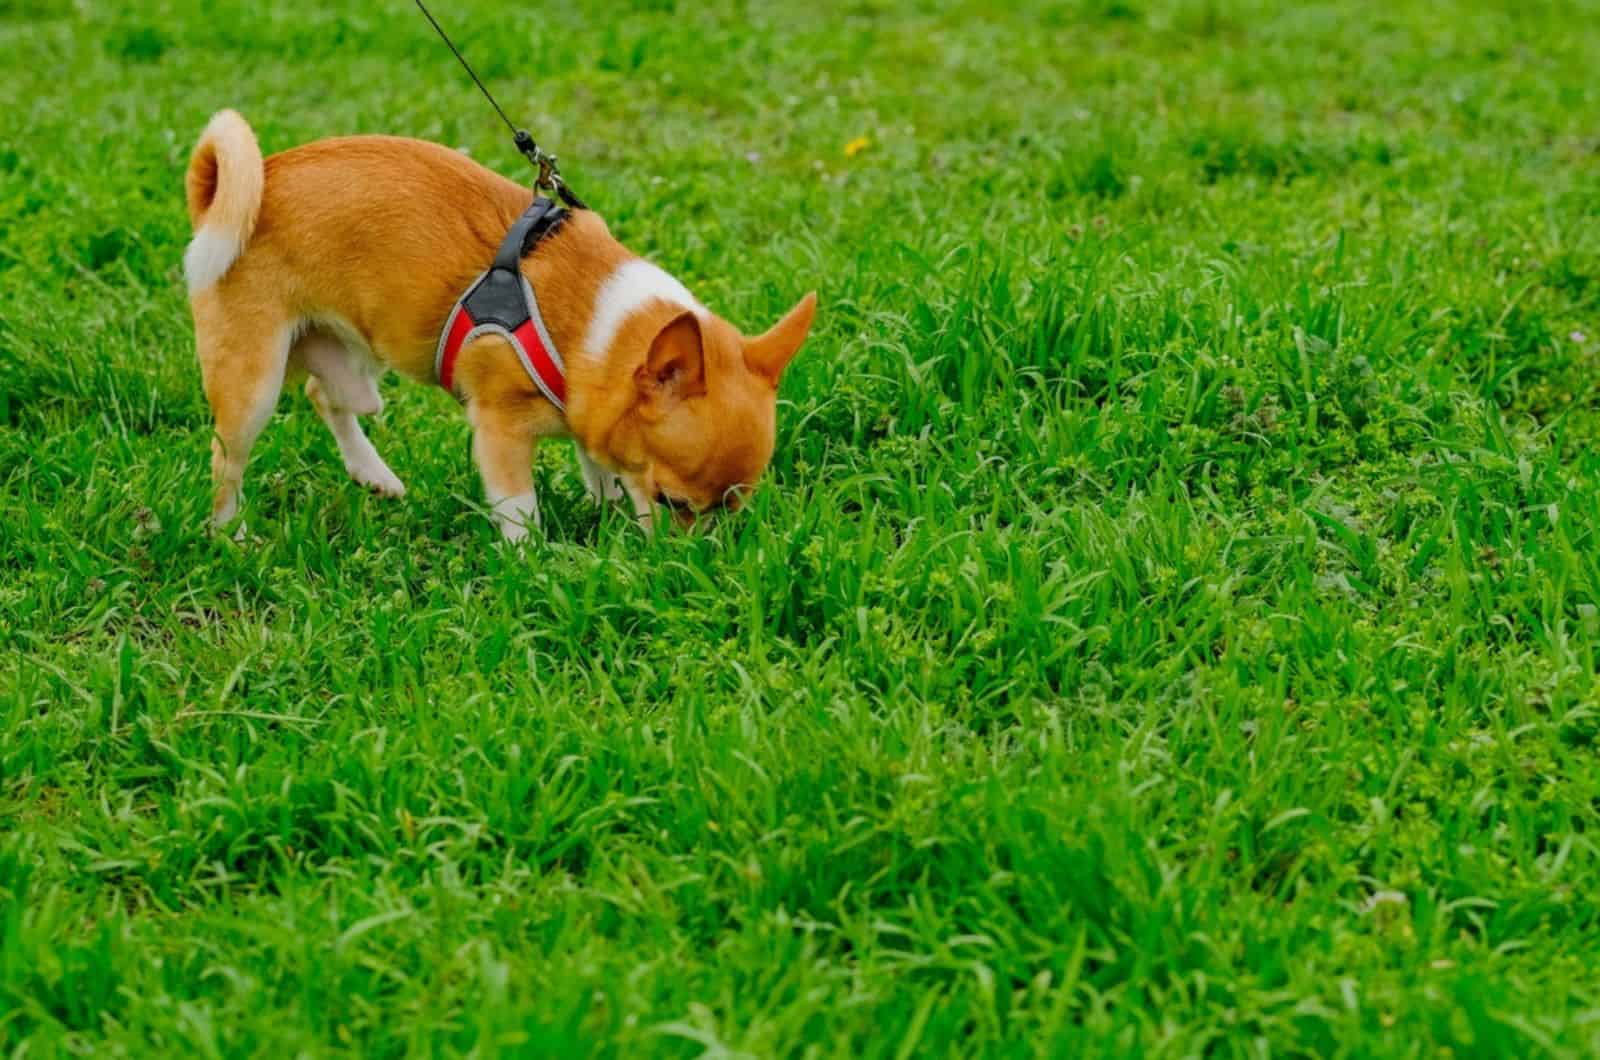 chihuahua dog sniffing the grass in the park